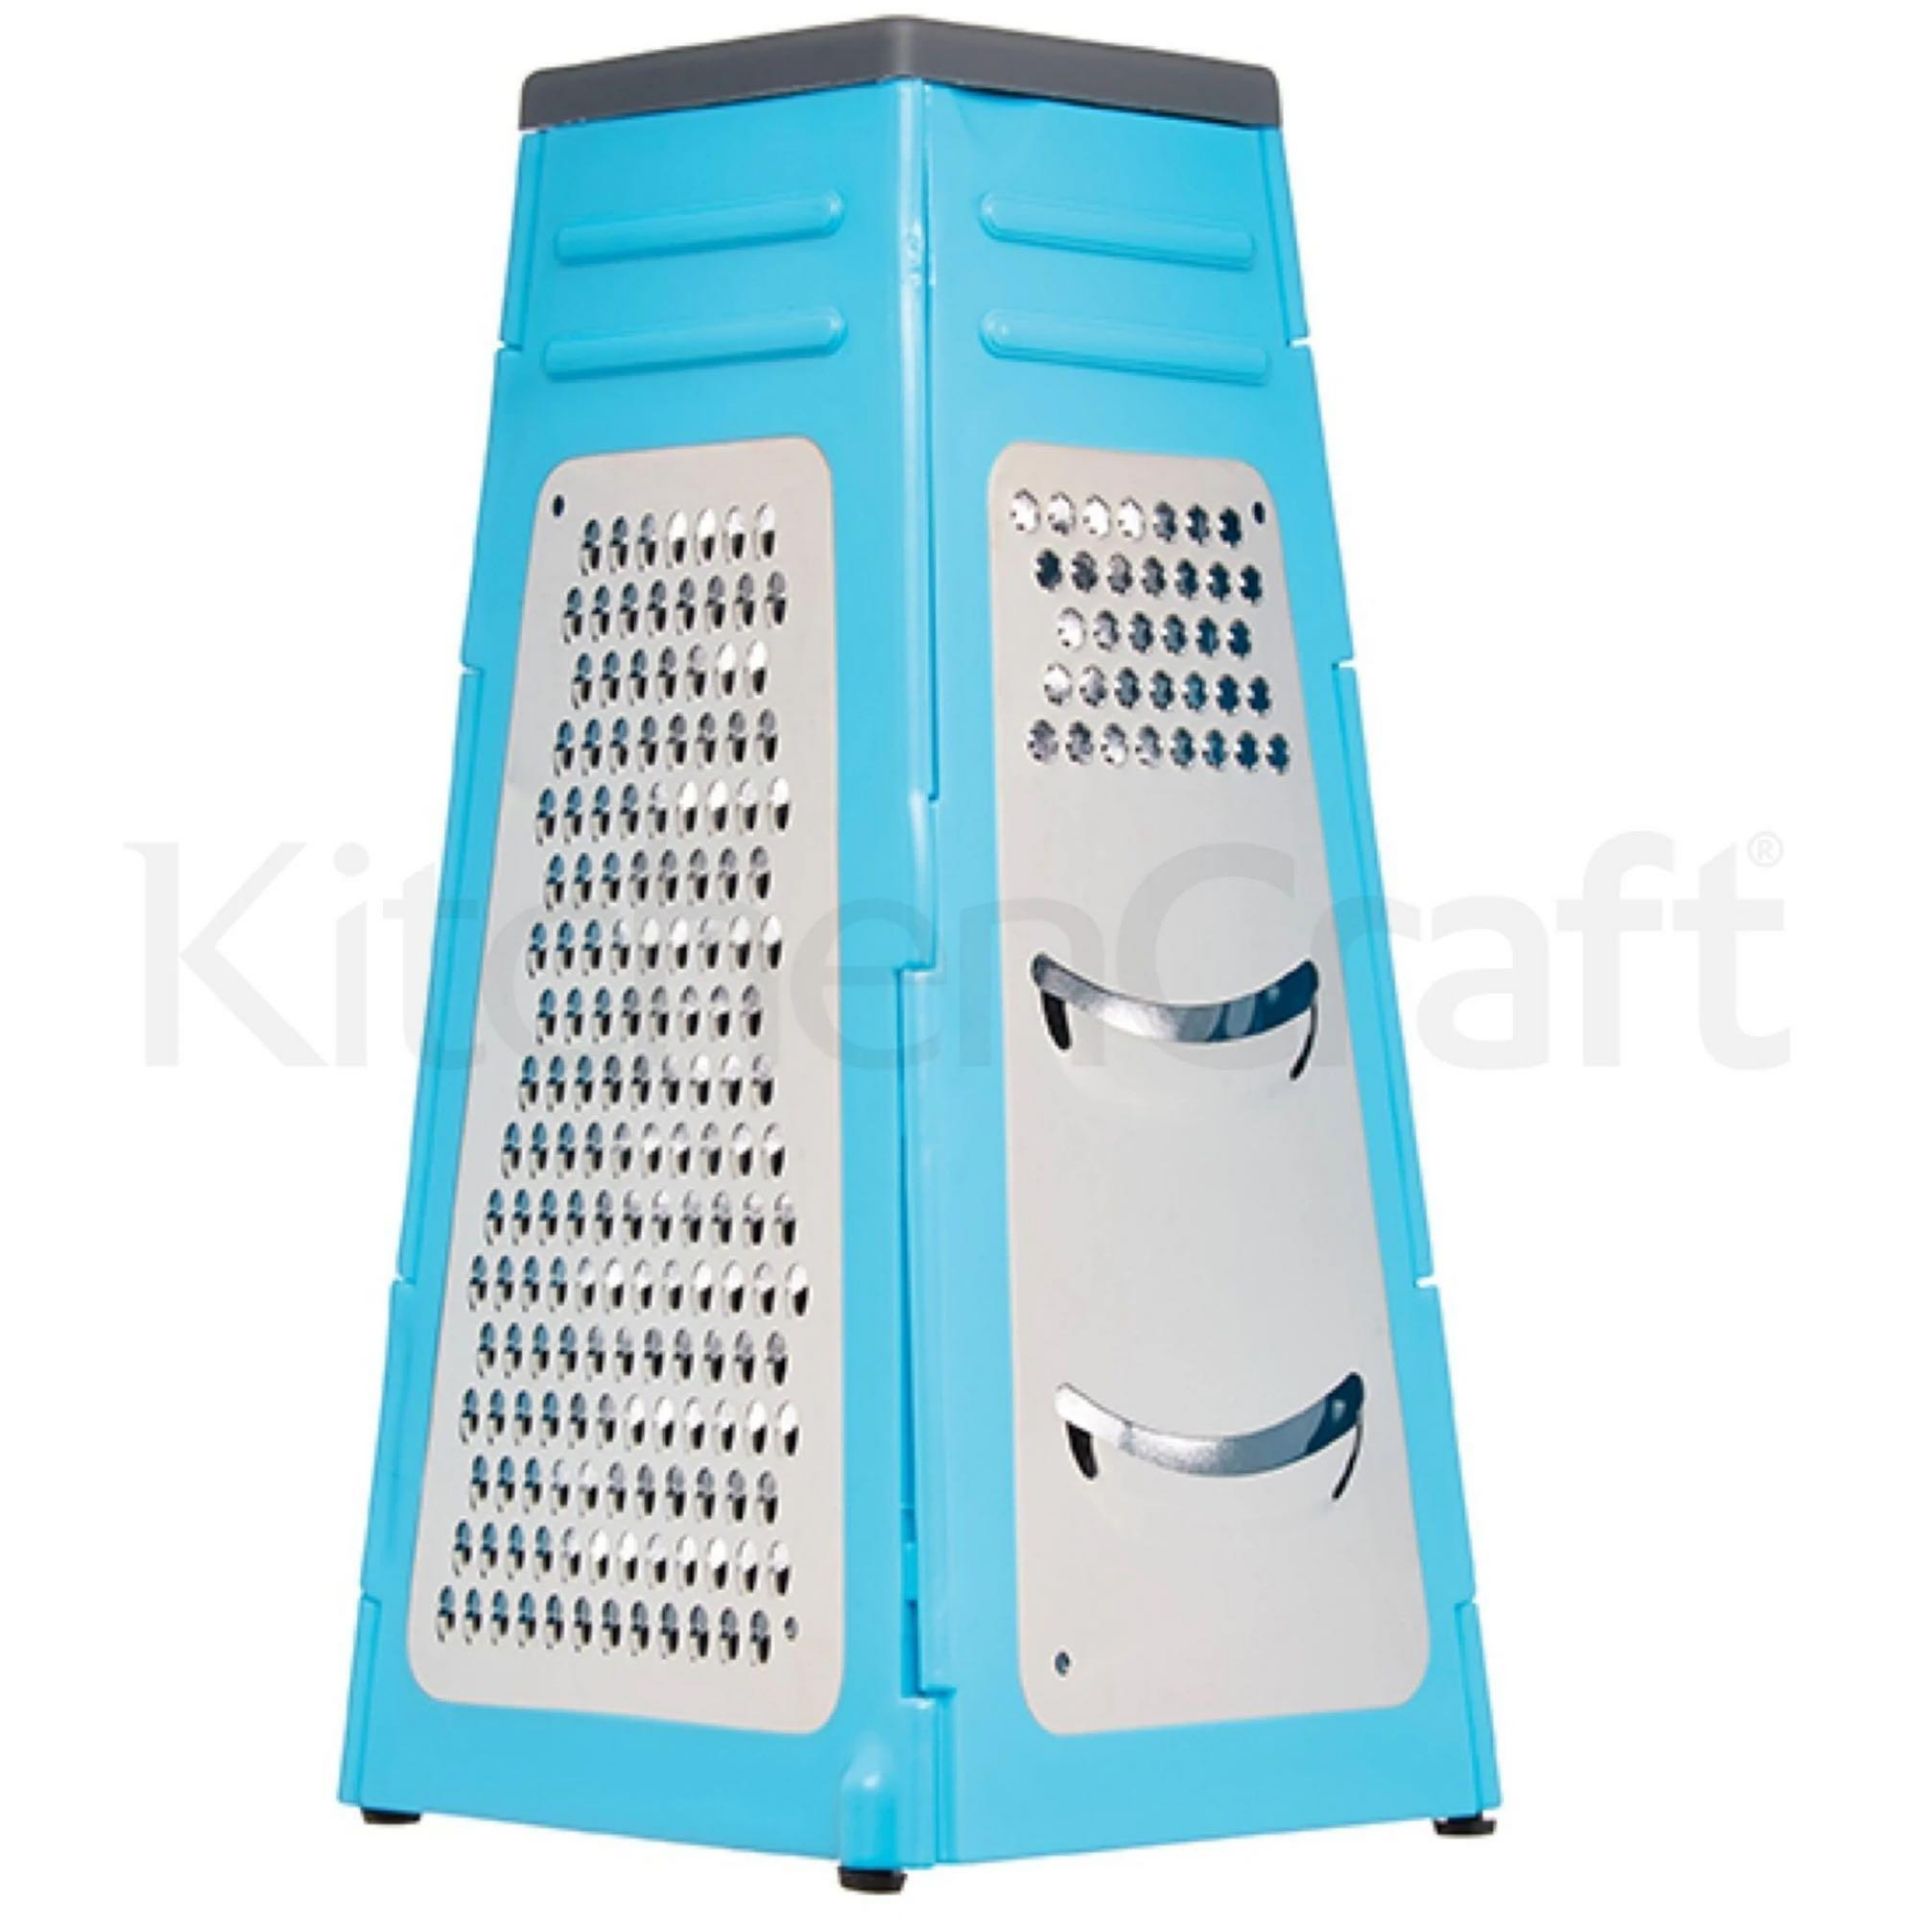 Combined RRP £430 Lot To Contain 48 Brand New Four In One Fold Flat Graters (Appraisals Available On